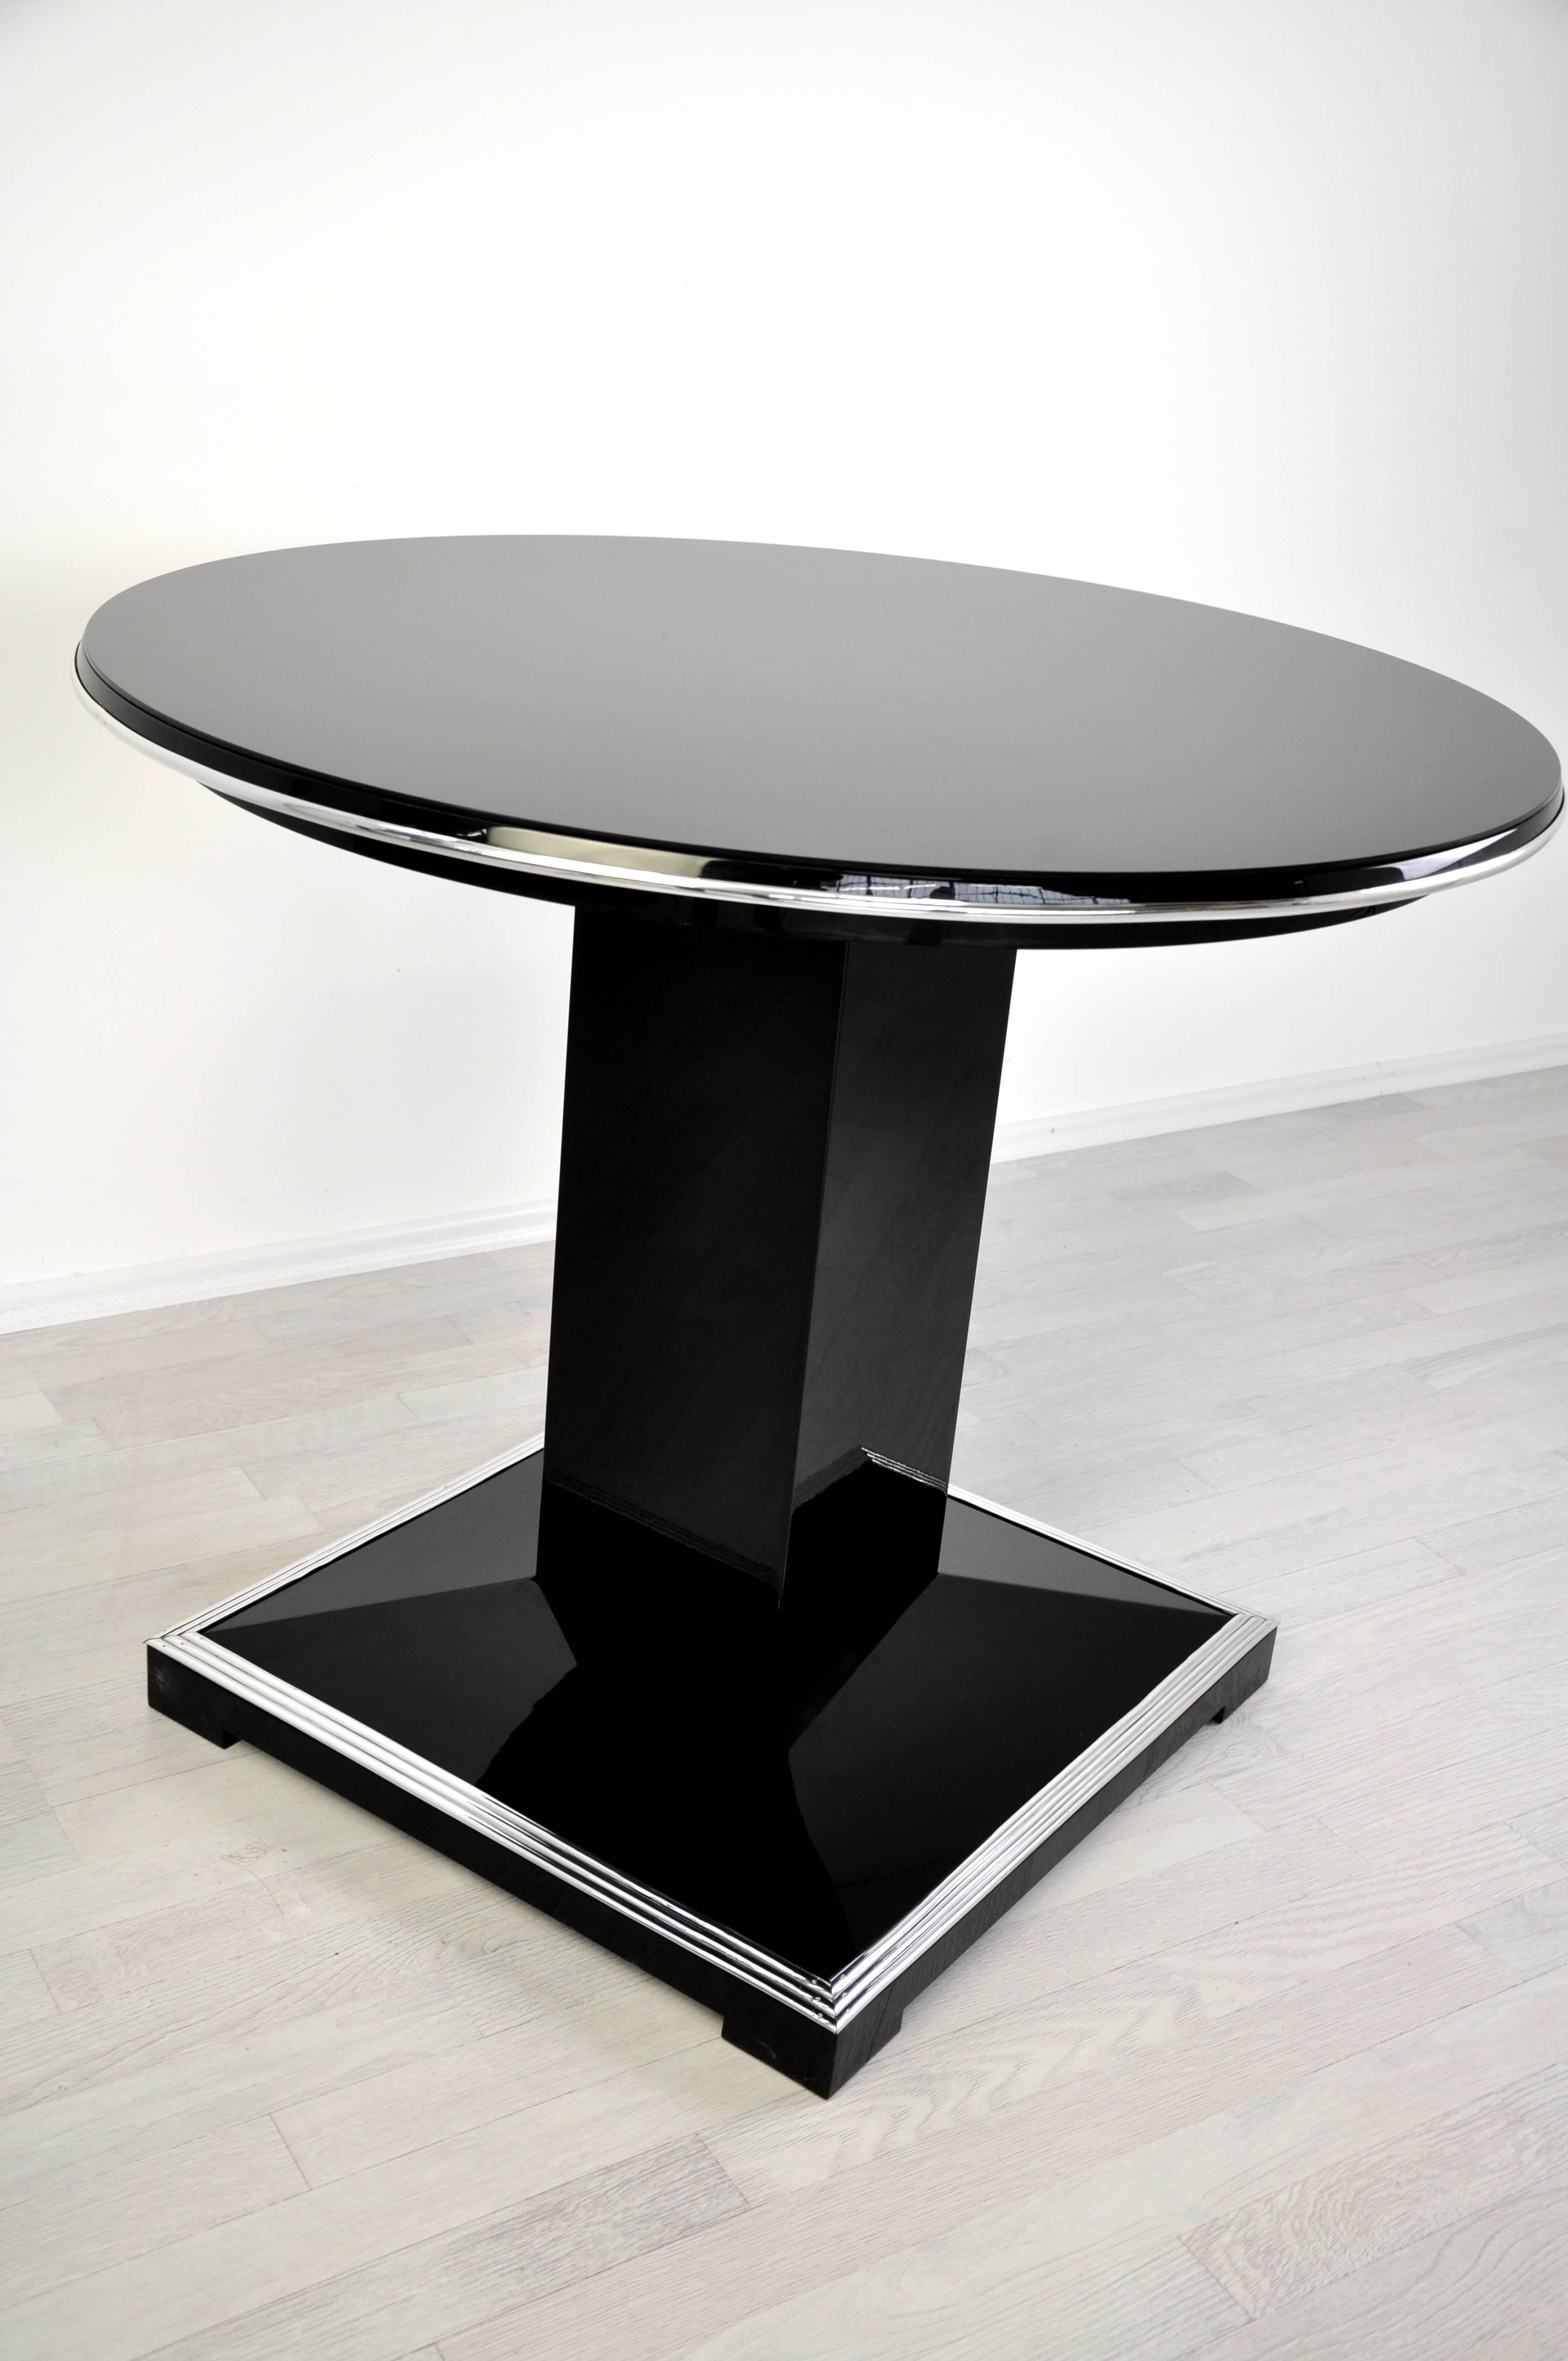 Polished French Lounge Table from the Art Deco